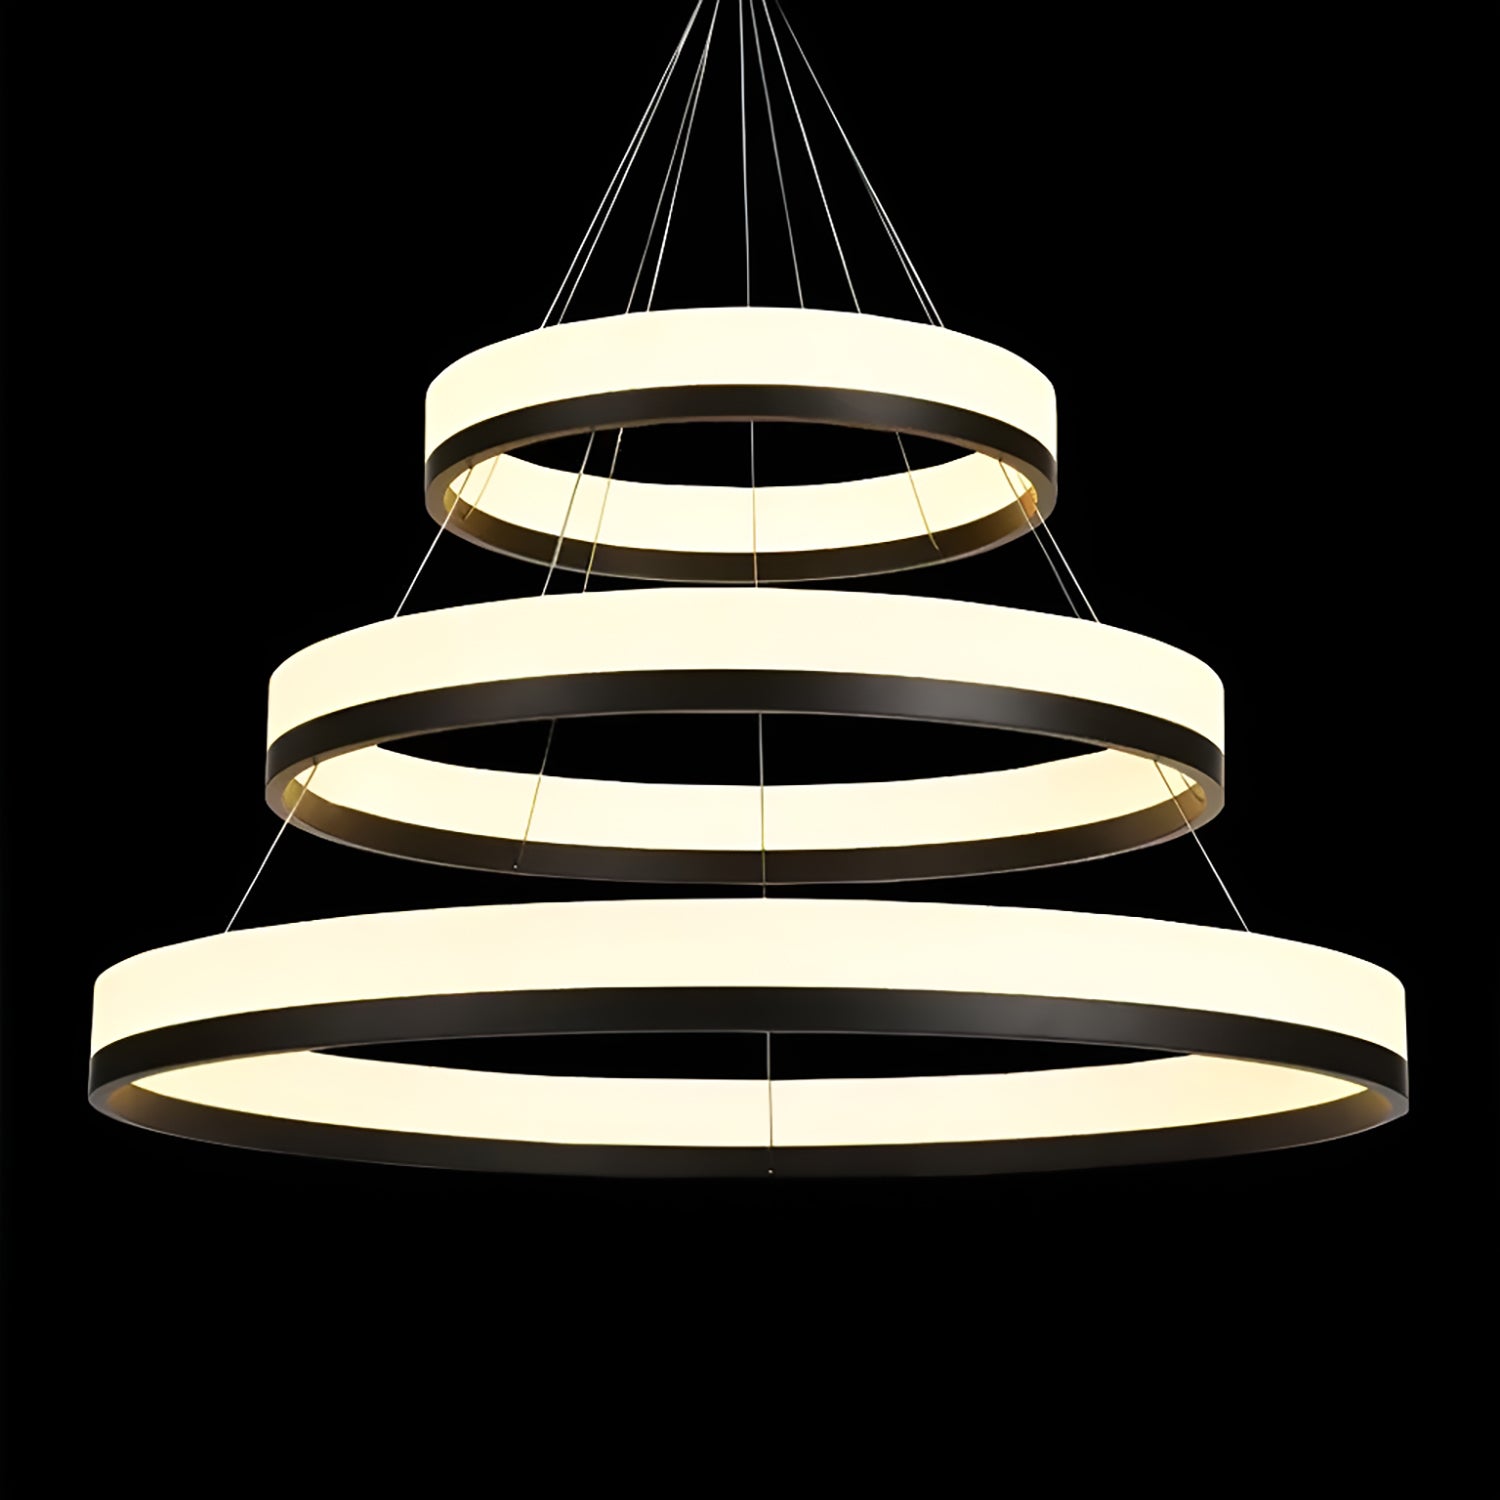 Two Rings & Three Rings Pendant Light Fixture-front-view|Sofary